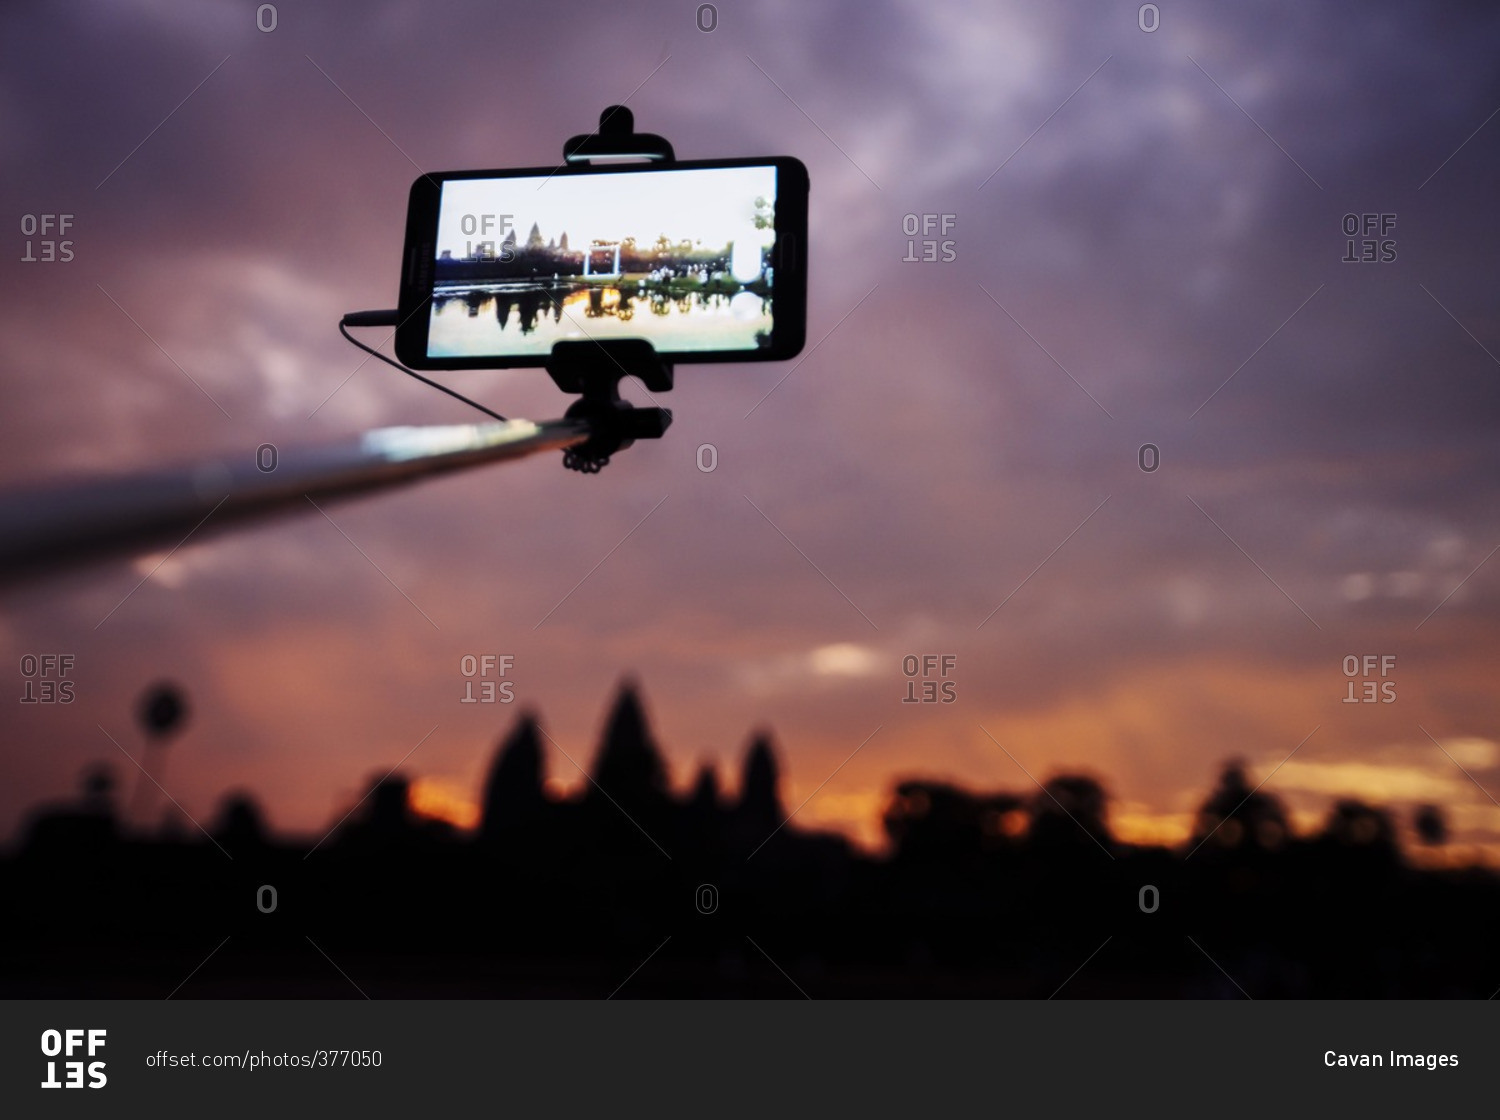 Low angle view of smart phone attached to monopod photographing silhouette Angkor Wat temple during sunset